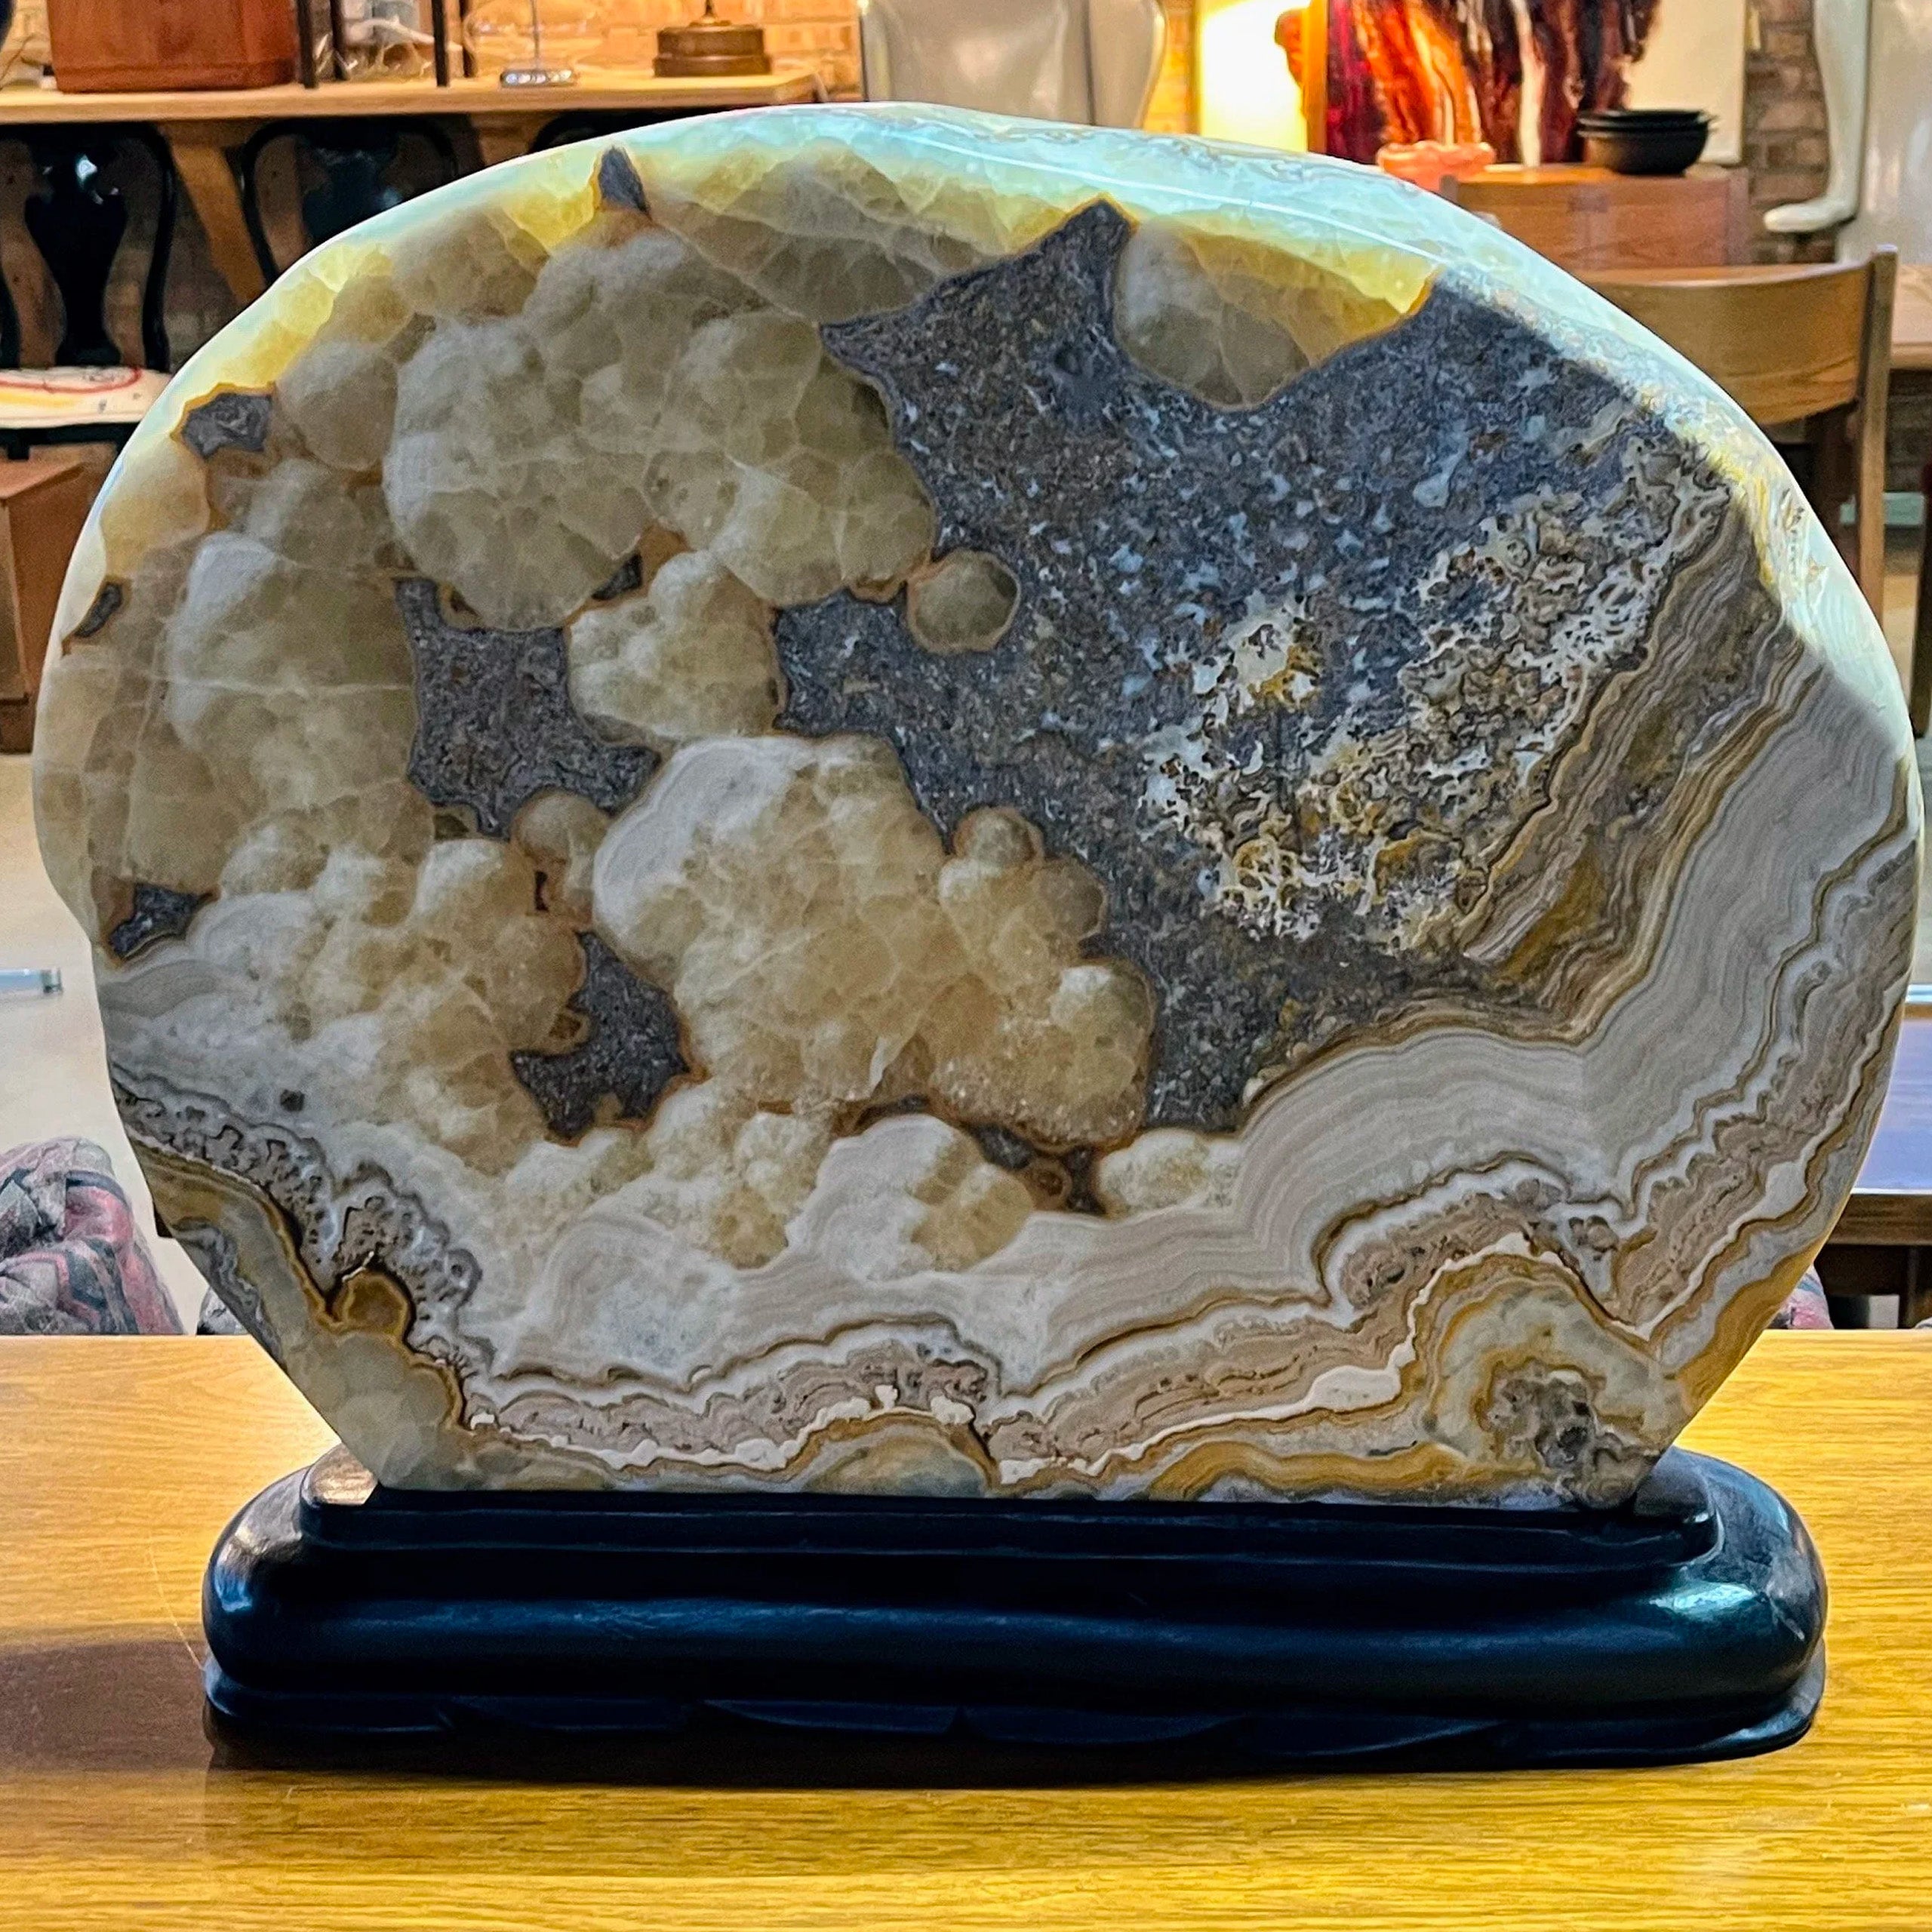 Very Large Natural Onyx Stone Sculpture on Carved Wooden Base

A large and visually striking polished slice of natural onyx, displayed on a custom carved wooden stand. This is a sculptural organic piece, with rich patterns of color and movement